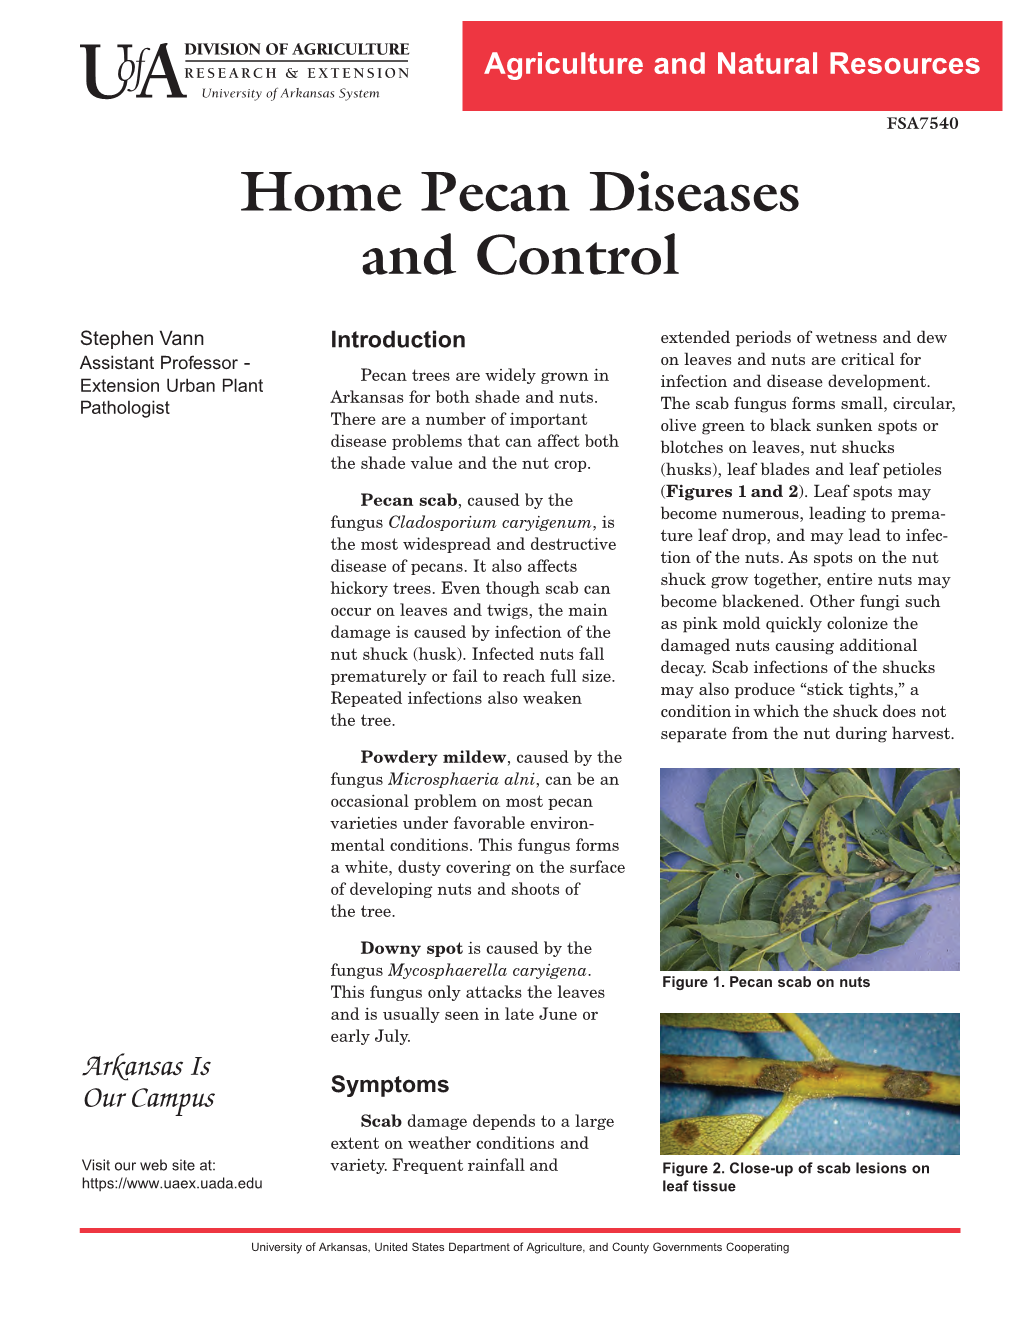 Home Pecan Diseases and Control